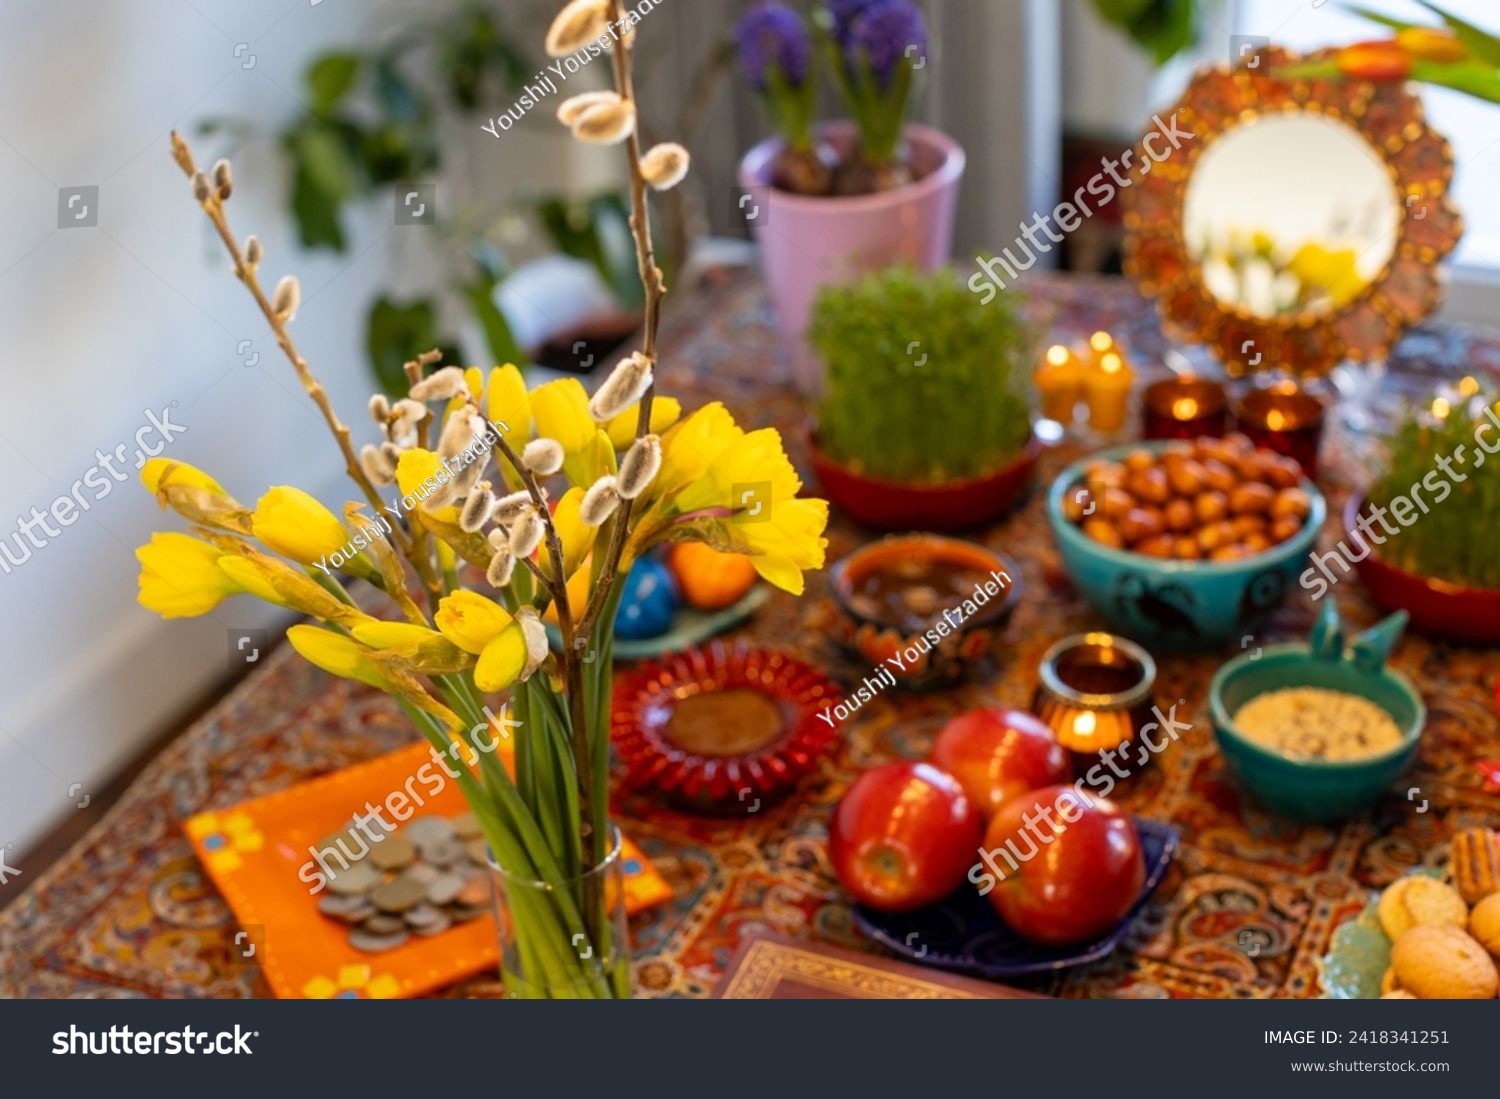 Haft Seen traditional table of Nowruz. Haft-Seen also spelled as Haft Sin is a tabletop (sofreh) arrangement of seven symbolic items traditionally displayed at Nowruz, the Iranian new year. #2418341251